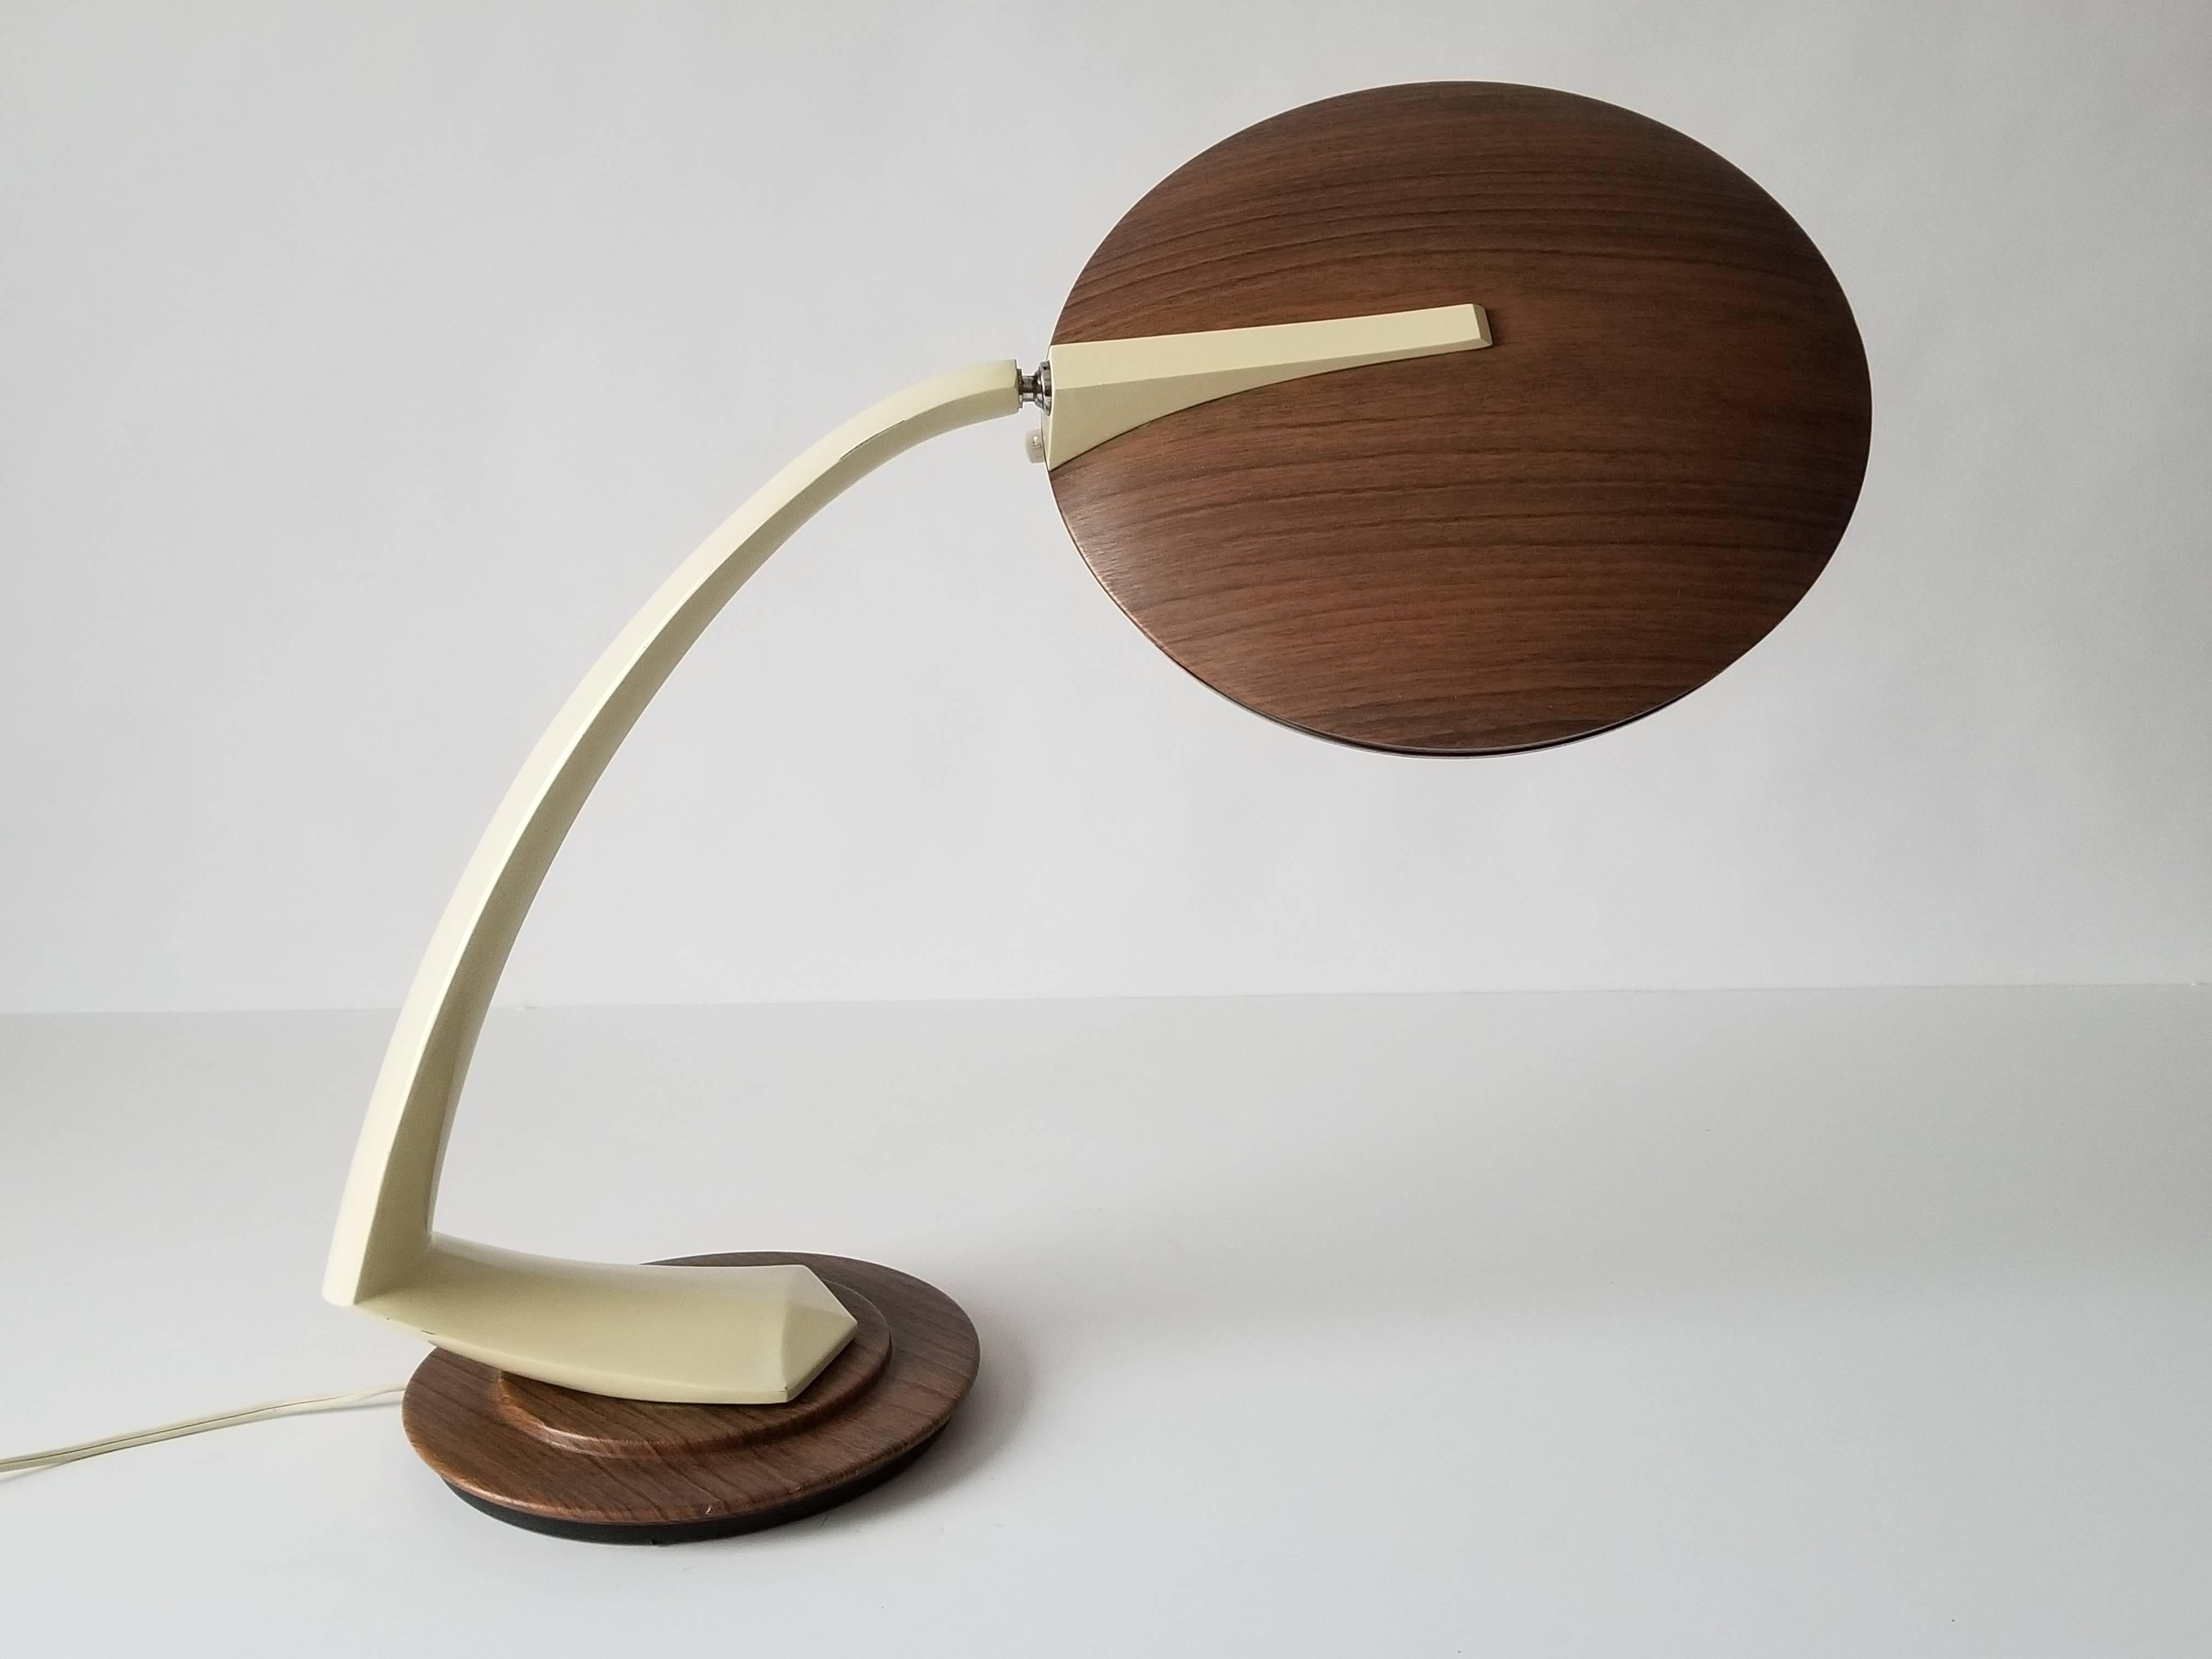 Space Age design Fase table lamp from the 1960s. 

Original wood grain motif finish. Enameled arm. 

Very agile shade positioning and base rotate 360 degree . 

Well made with prime quality material. 

Extremely solid construction . 

Depolished